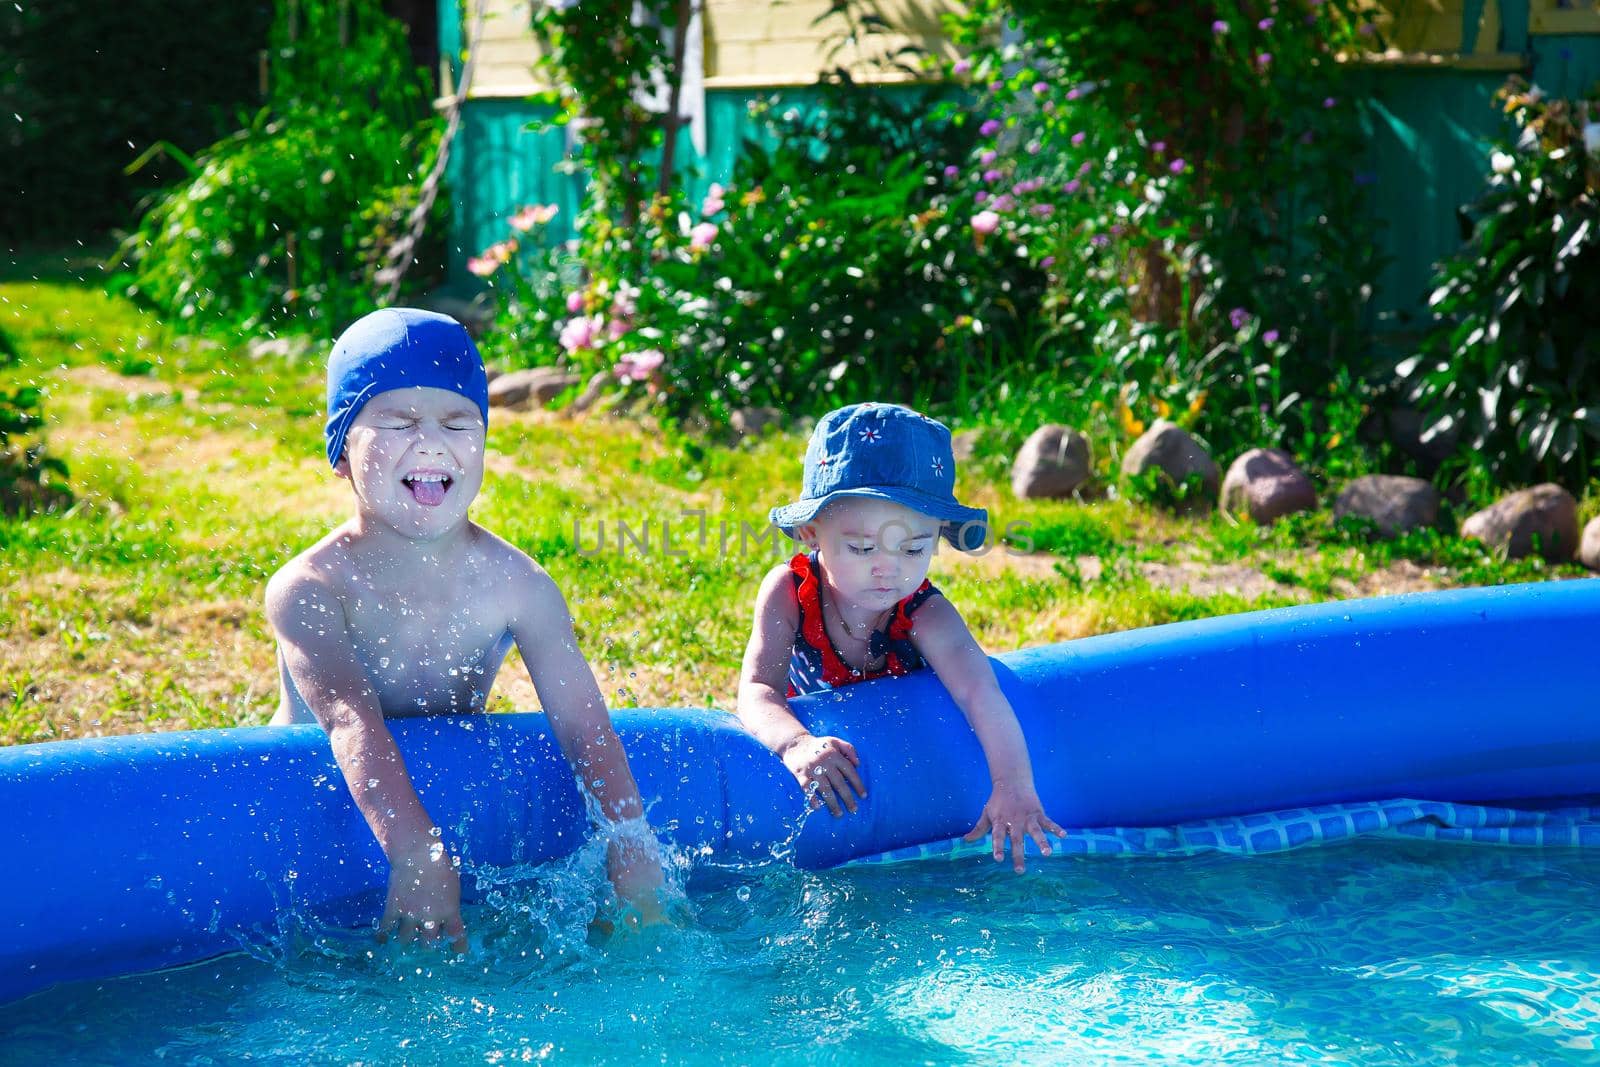 Brother and sister playfully splashing around the blue inflatable pool